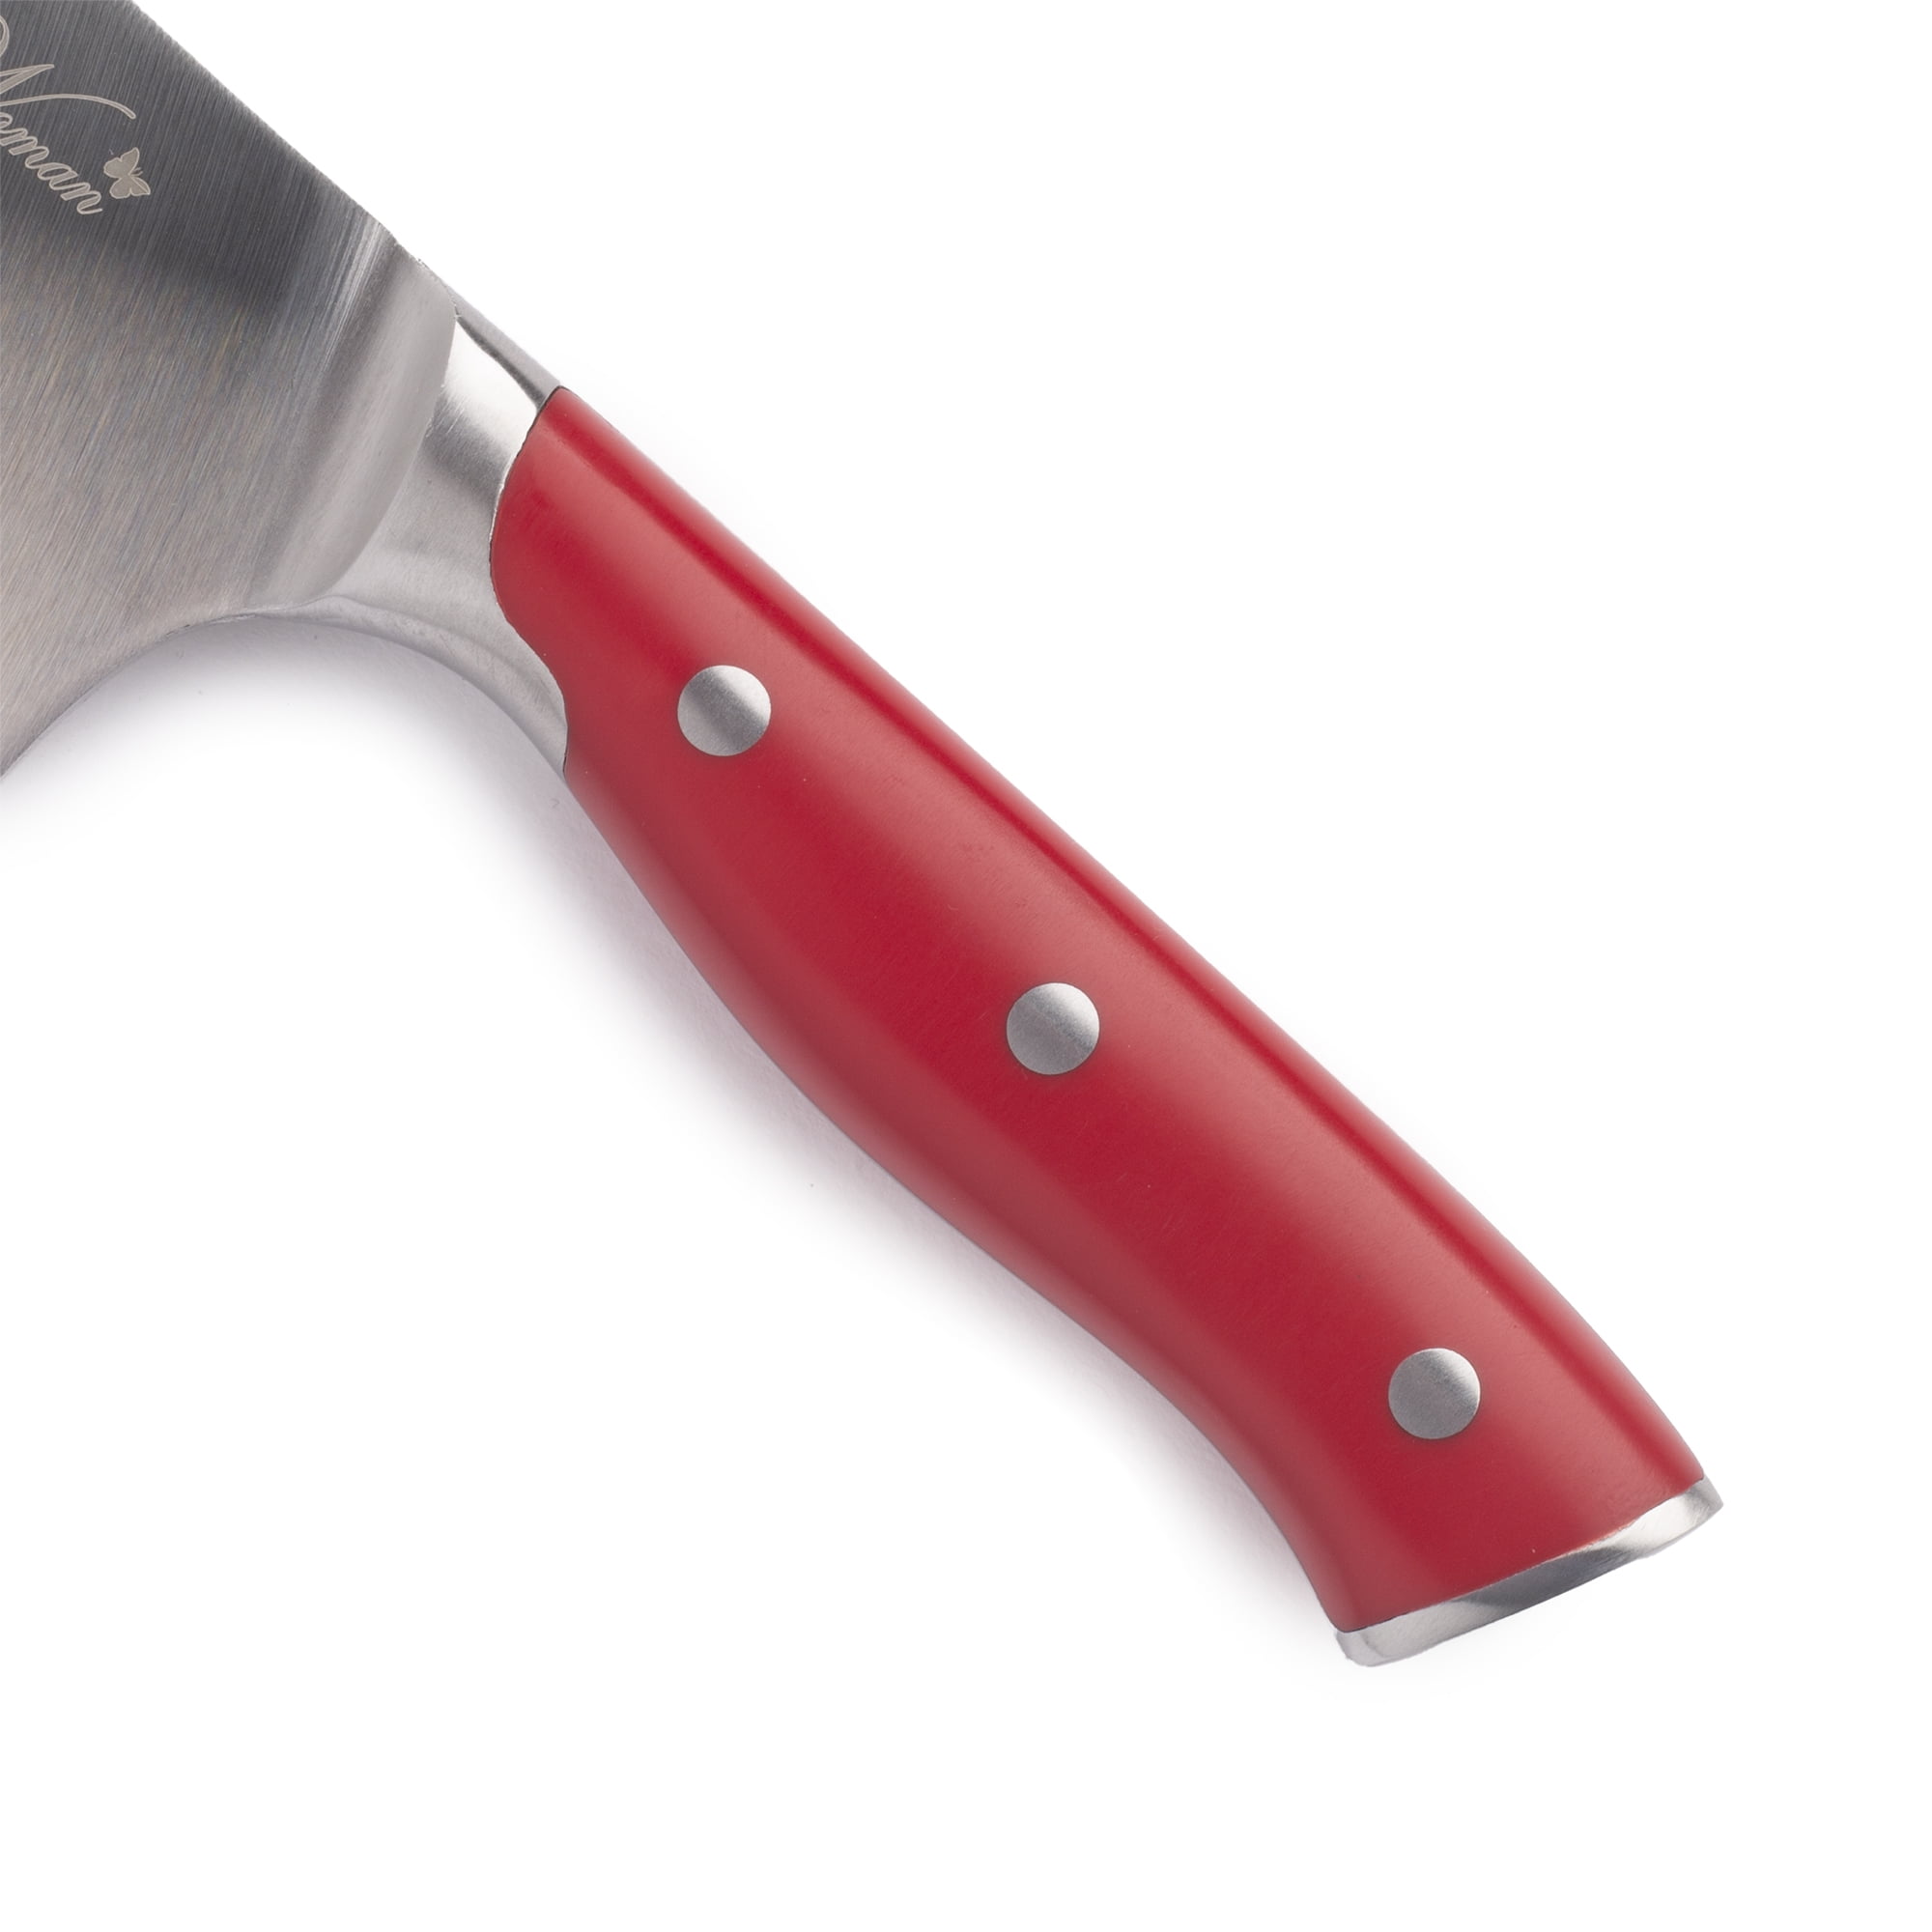 8 Inch Chef Knife with a Red Granite Handle, a Garnet Colored Cubic  Zirconia Stone at the Back of the Knife and Brass and Stainless Steel  Decorative Rings : Craftstone Knives